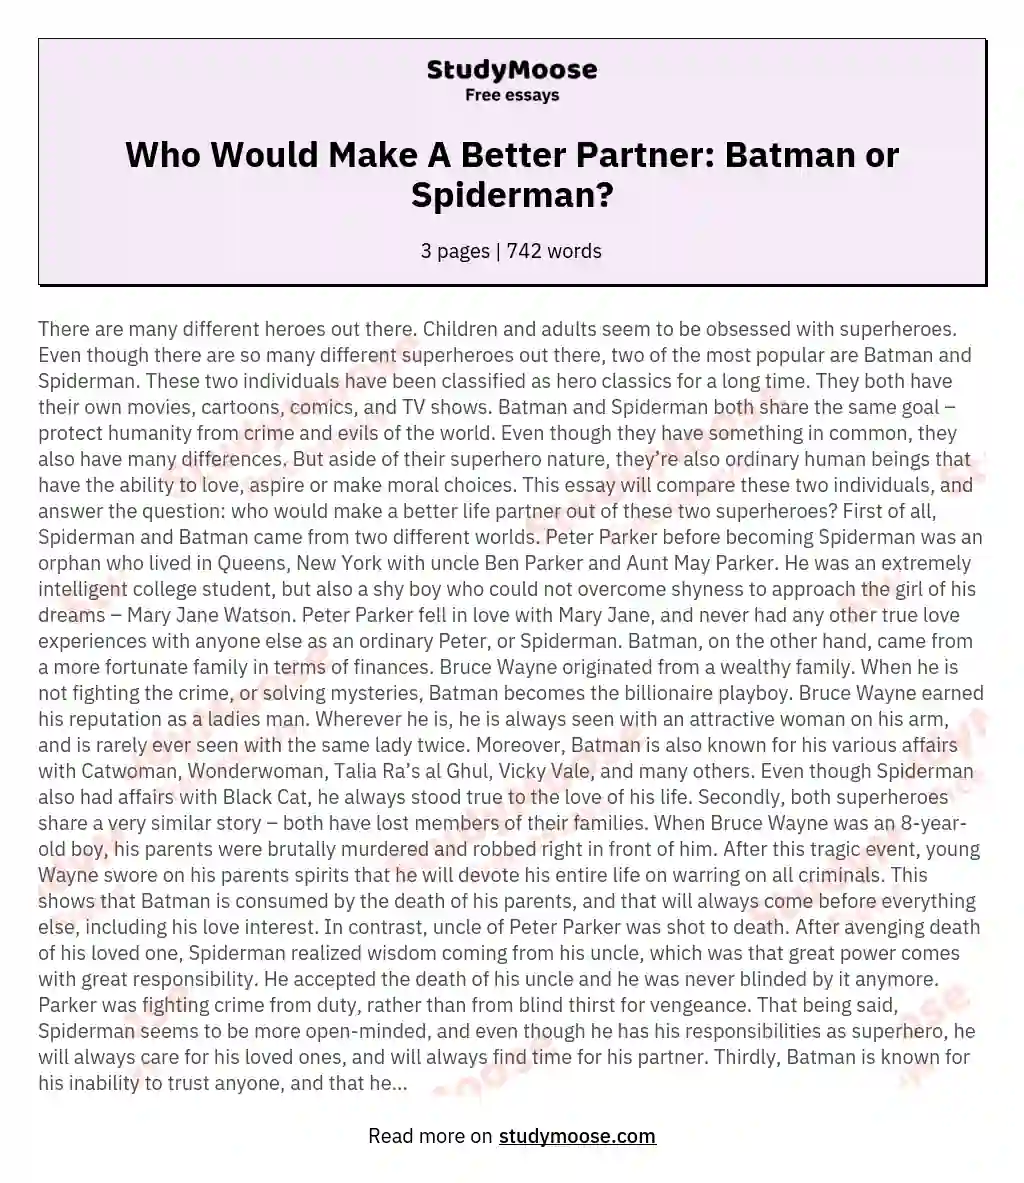 Who Would Make A Better Partner: Batman or Spiderman?